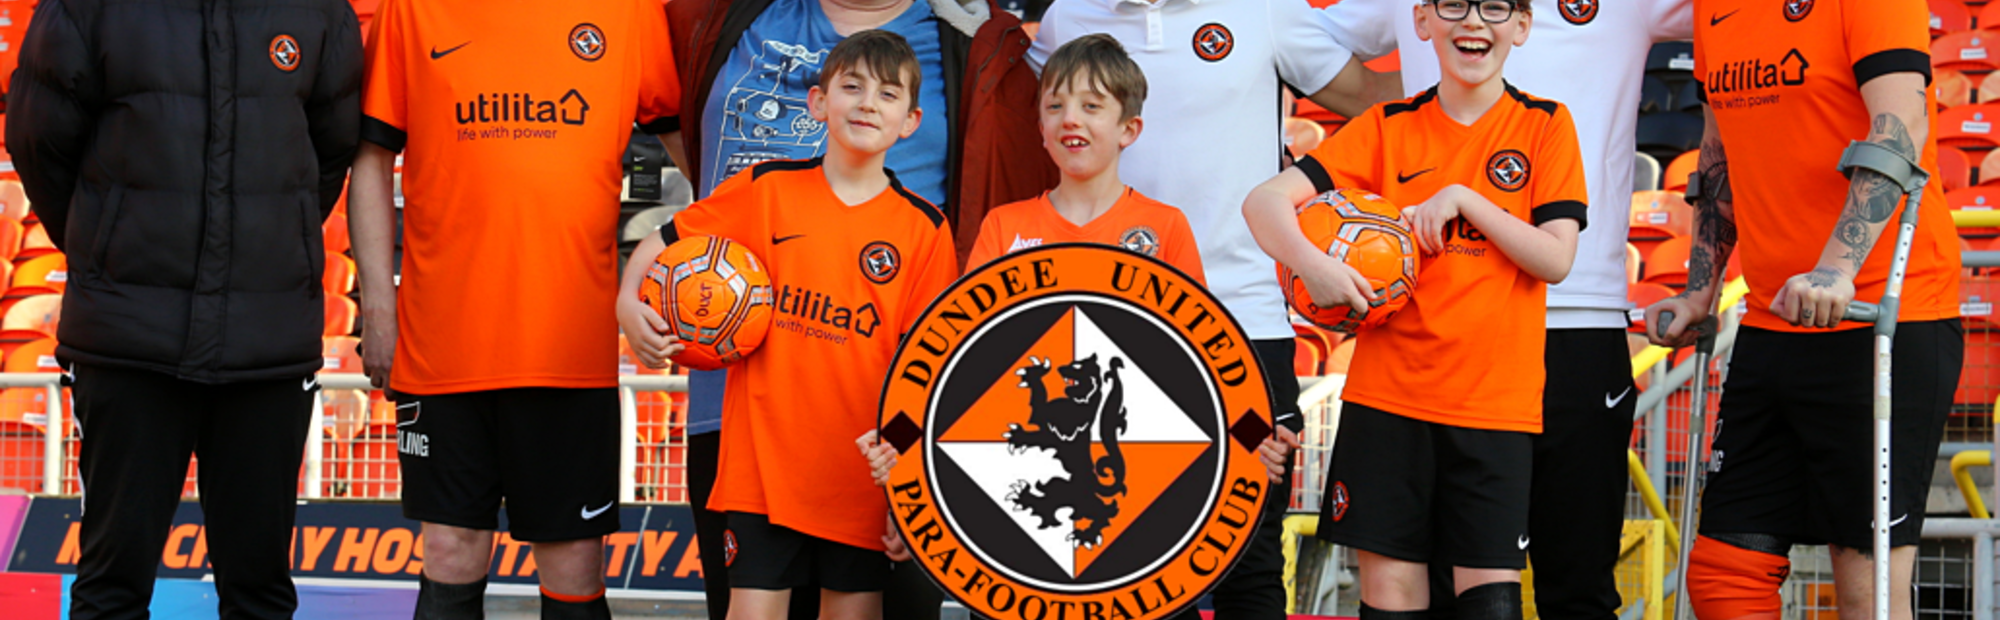 Dundee United Community Trust  announce the launch of Dundee United Para Football Club.